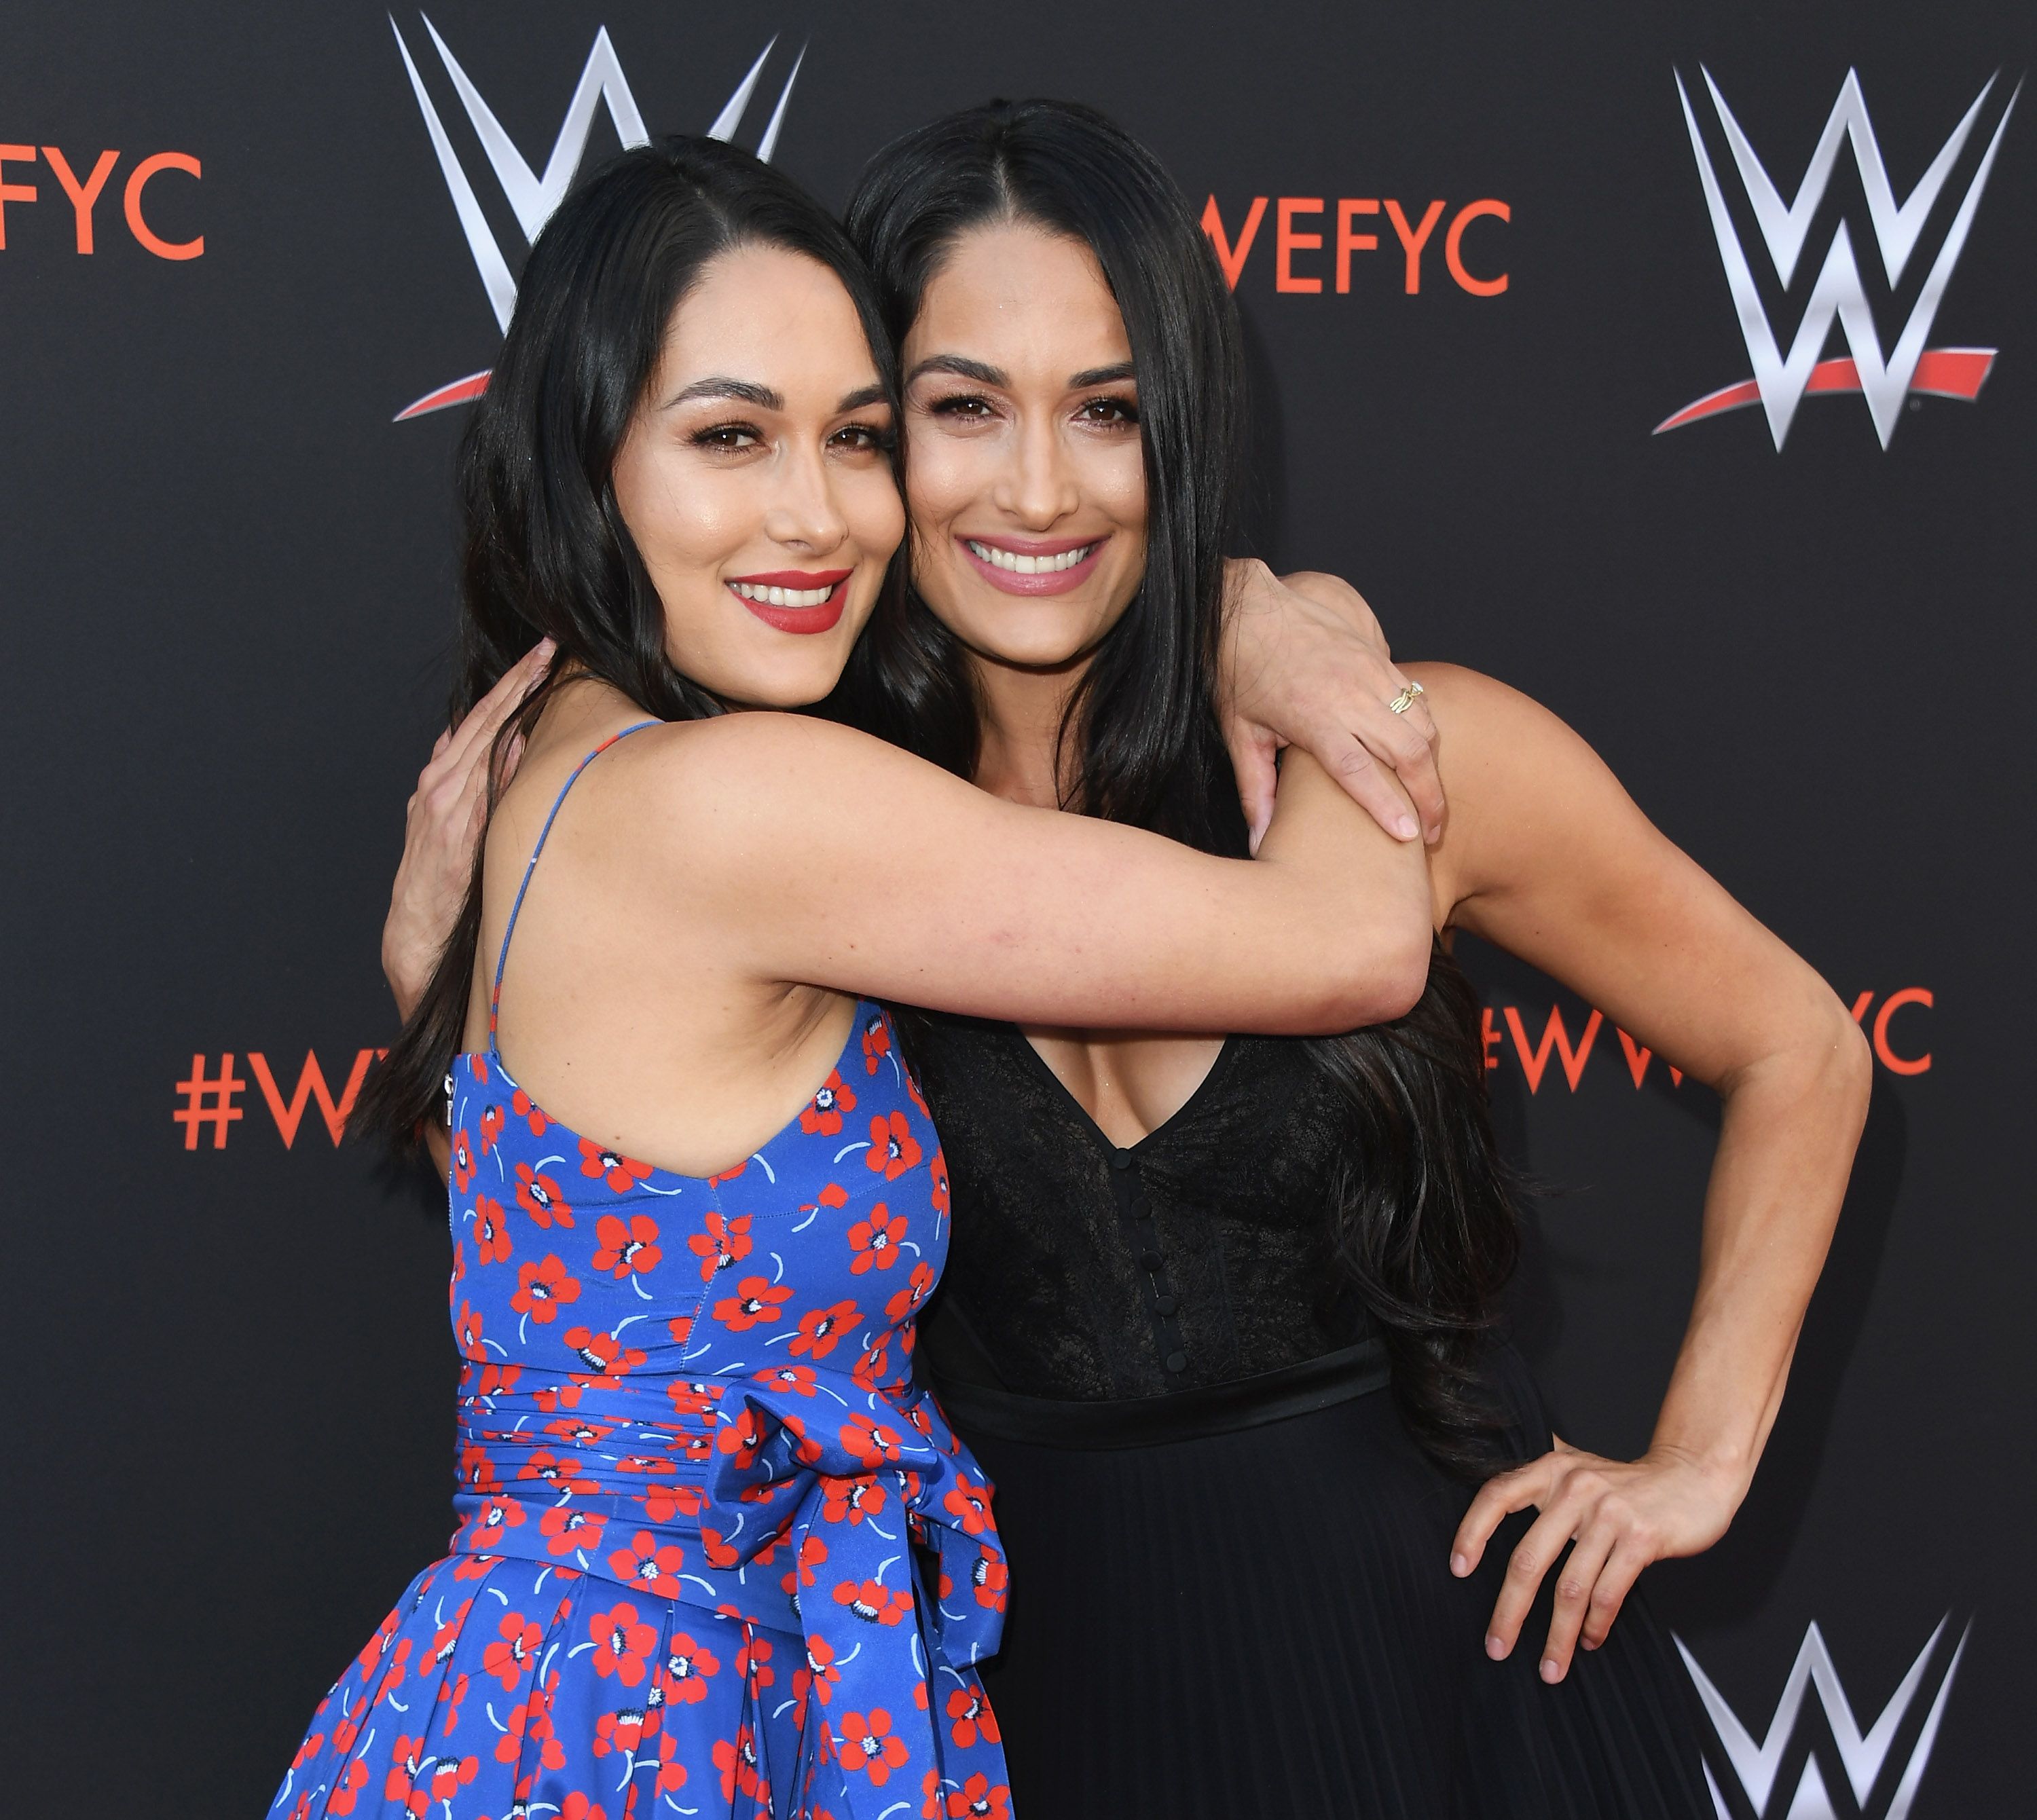 Brie Bella and Nikki Bella at WWE's First-Ever Emmy "For Your Consideration" Event at Saban Media Center on June 6, 2018 | Photo: Getty Images